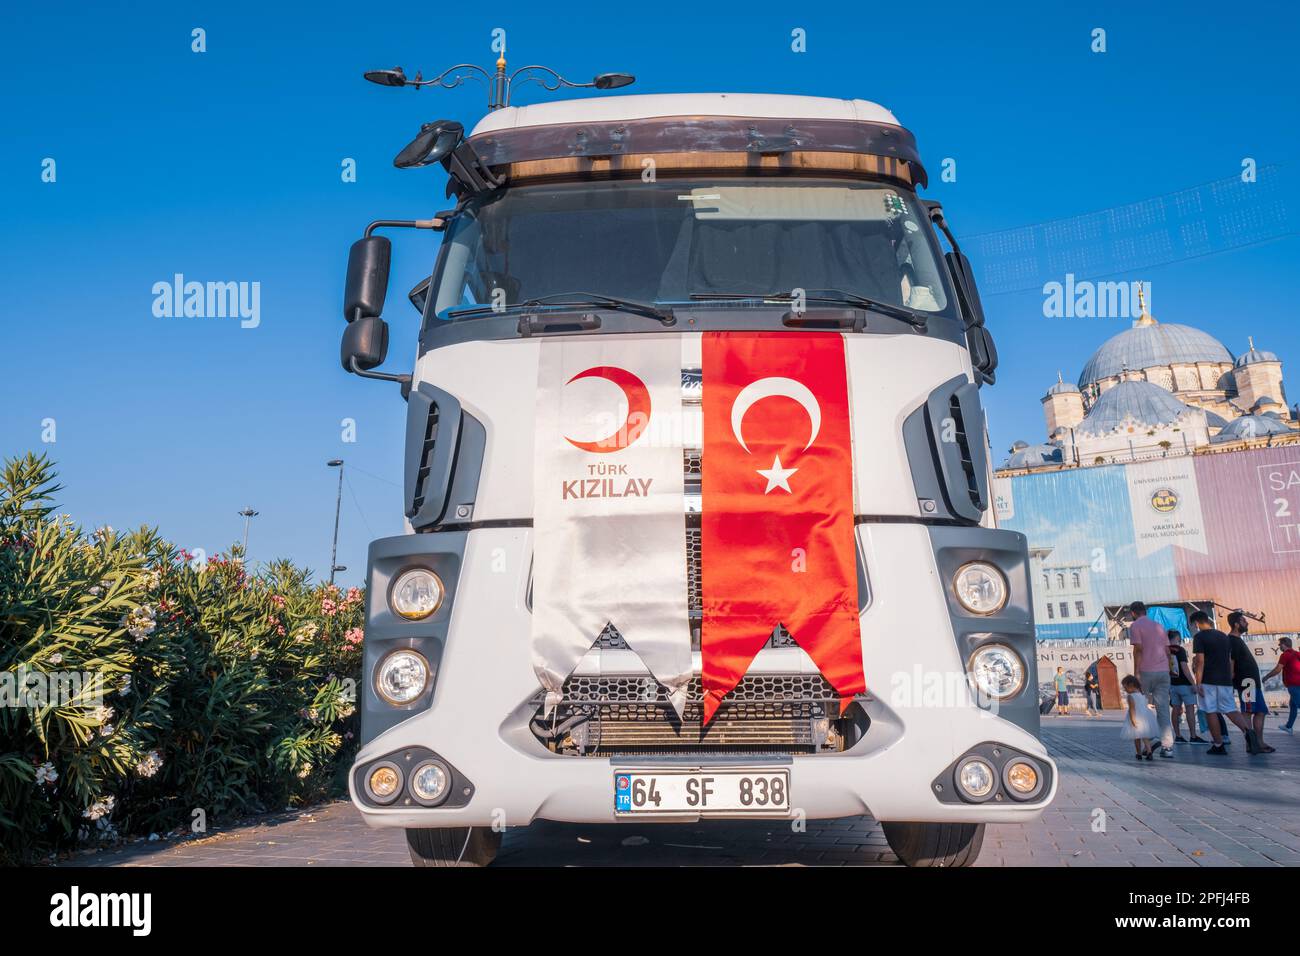 Eminonu, Istanbul, Turkey - 07.20.2021: Turkish Red Crescent (Türk Kizilay) blood donation transportation lorry with flag in square in a clear sunny s Stock Photo